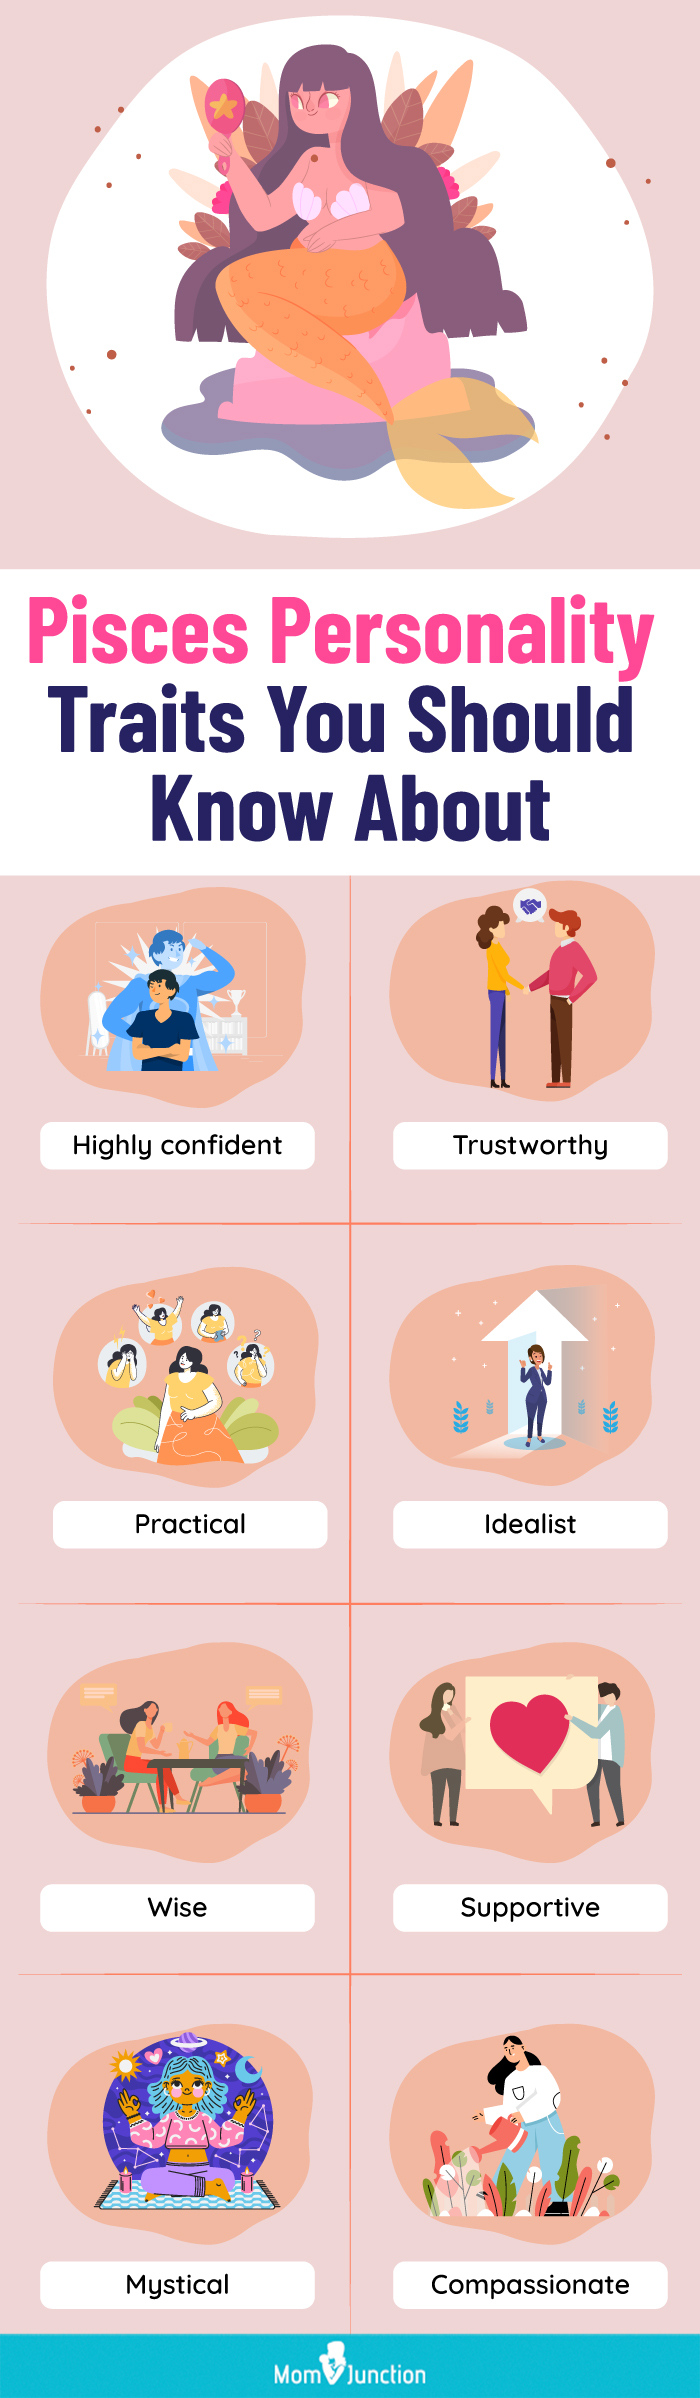 pisces personality traits you should know about(infographic)